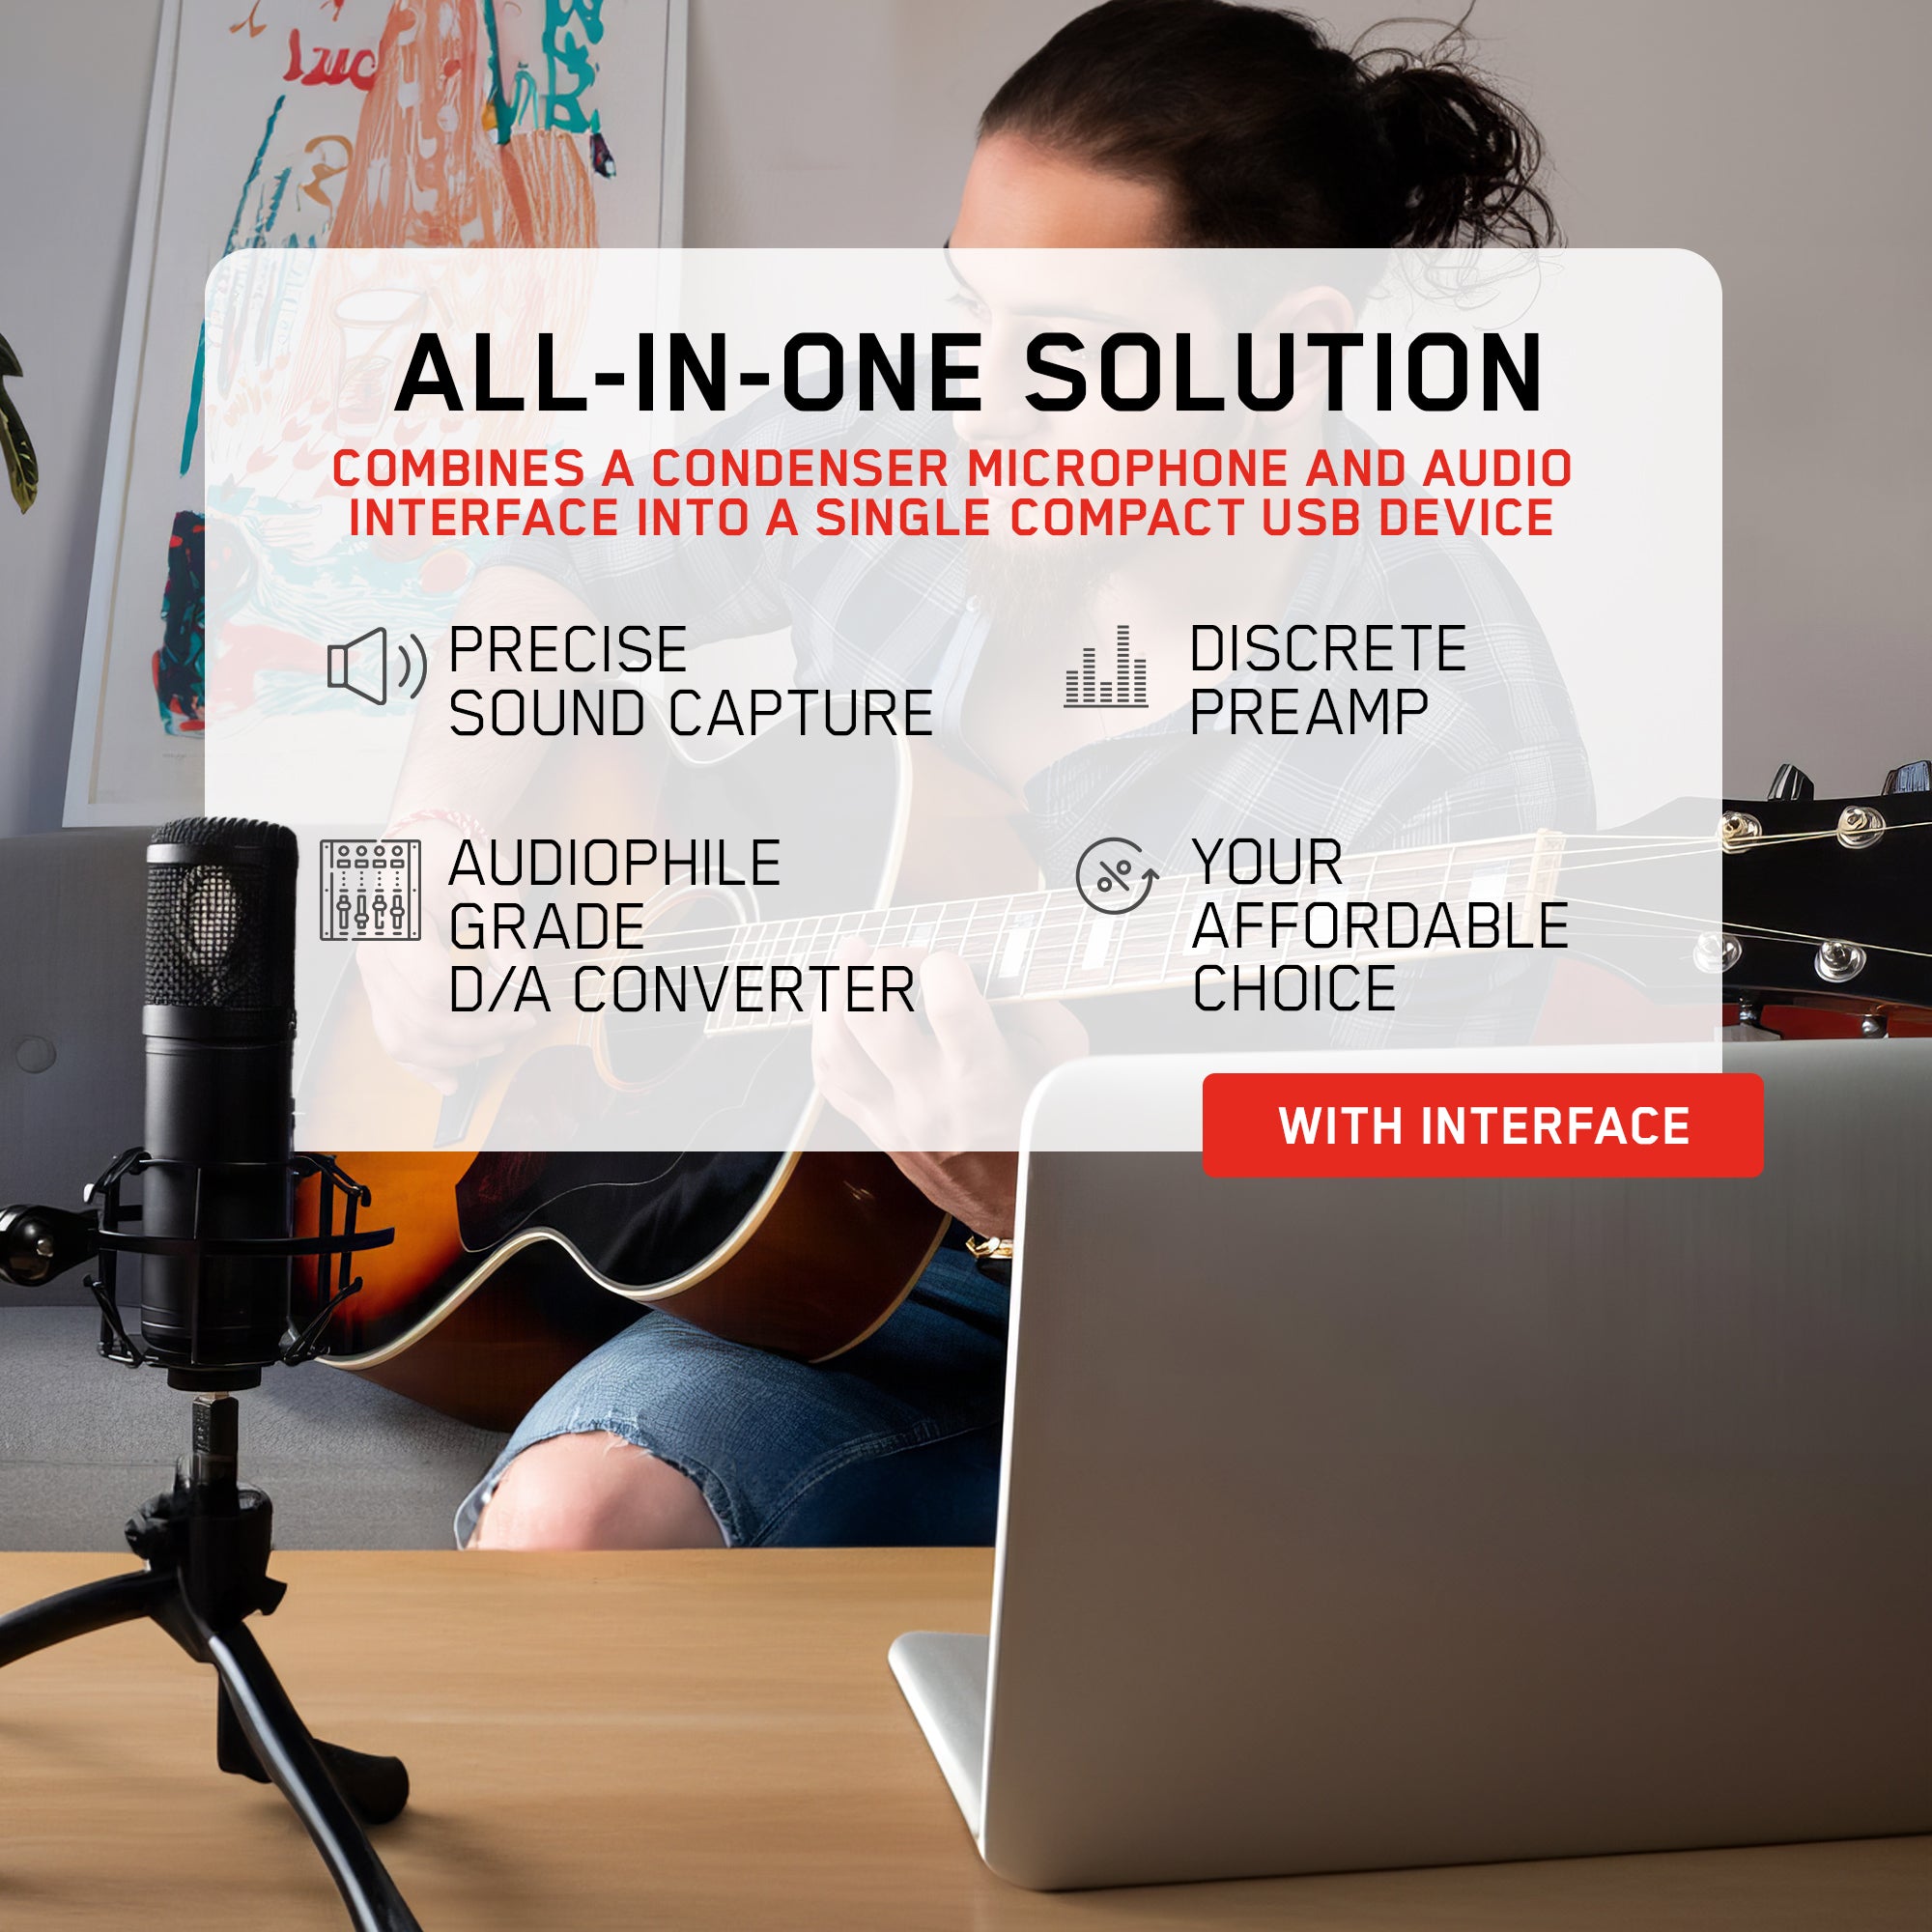 Antelope Audio - Axino recording system | Podcast microphone